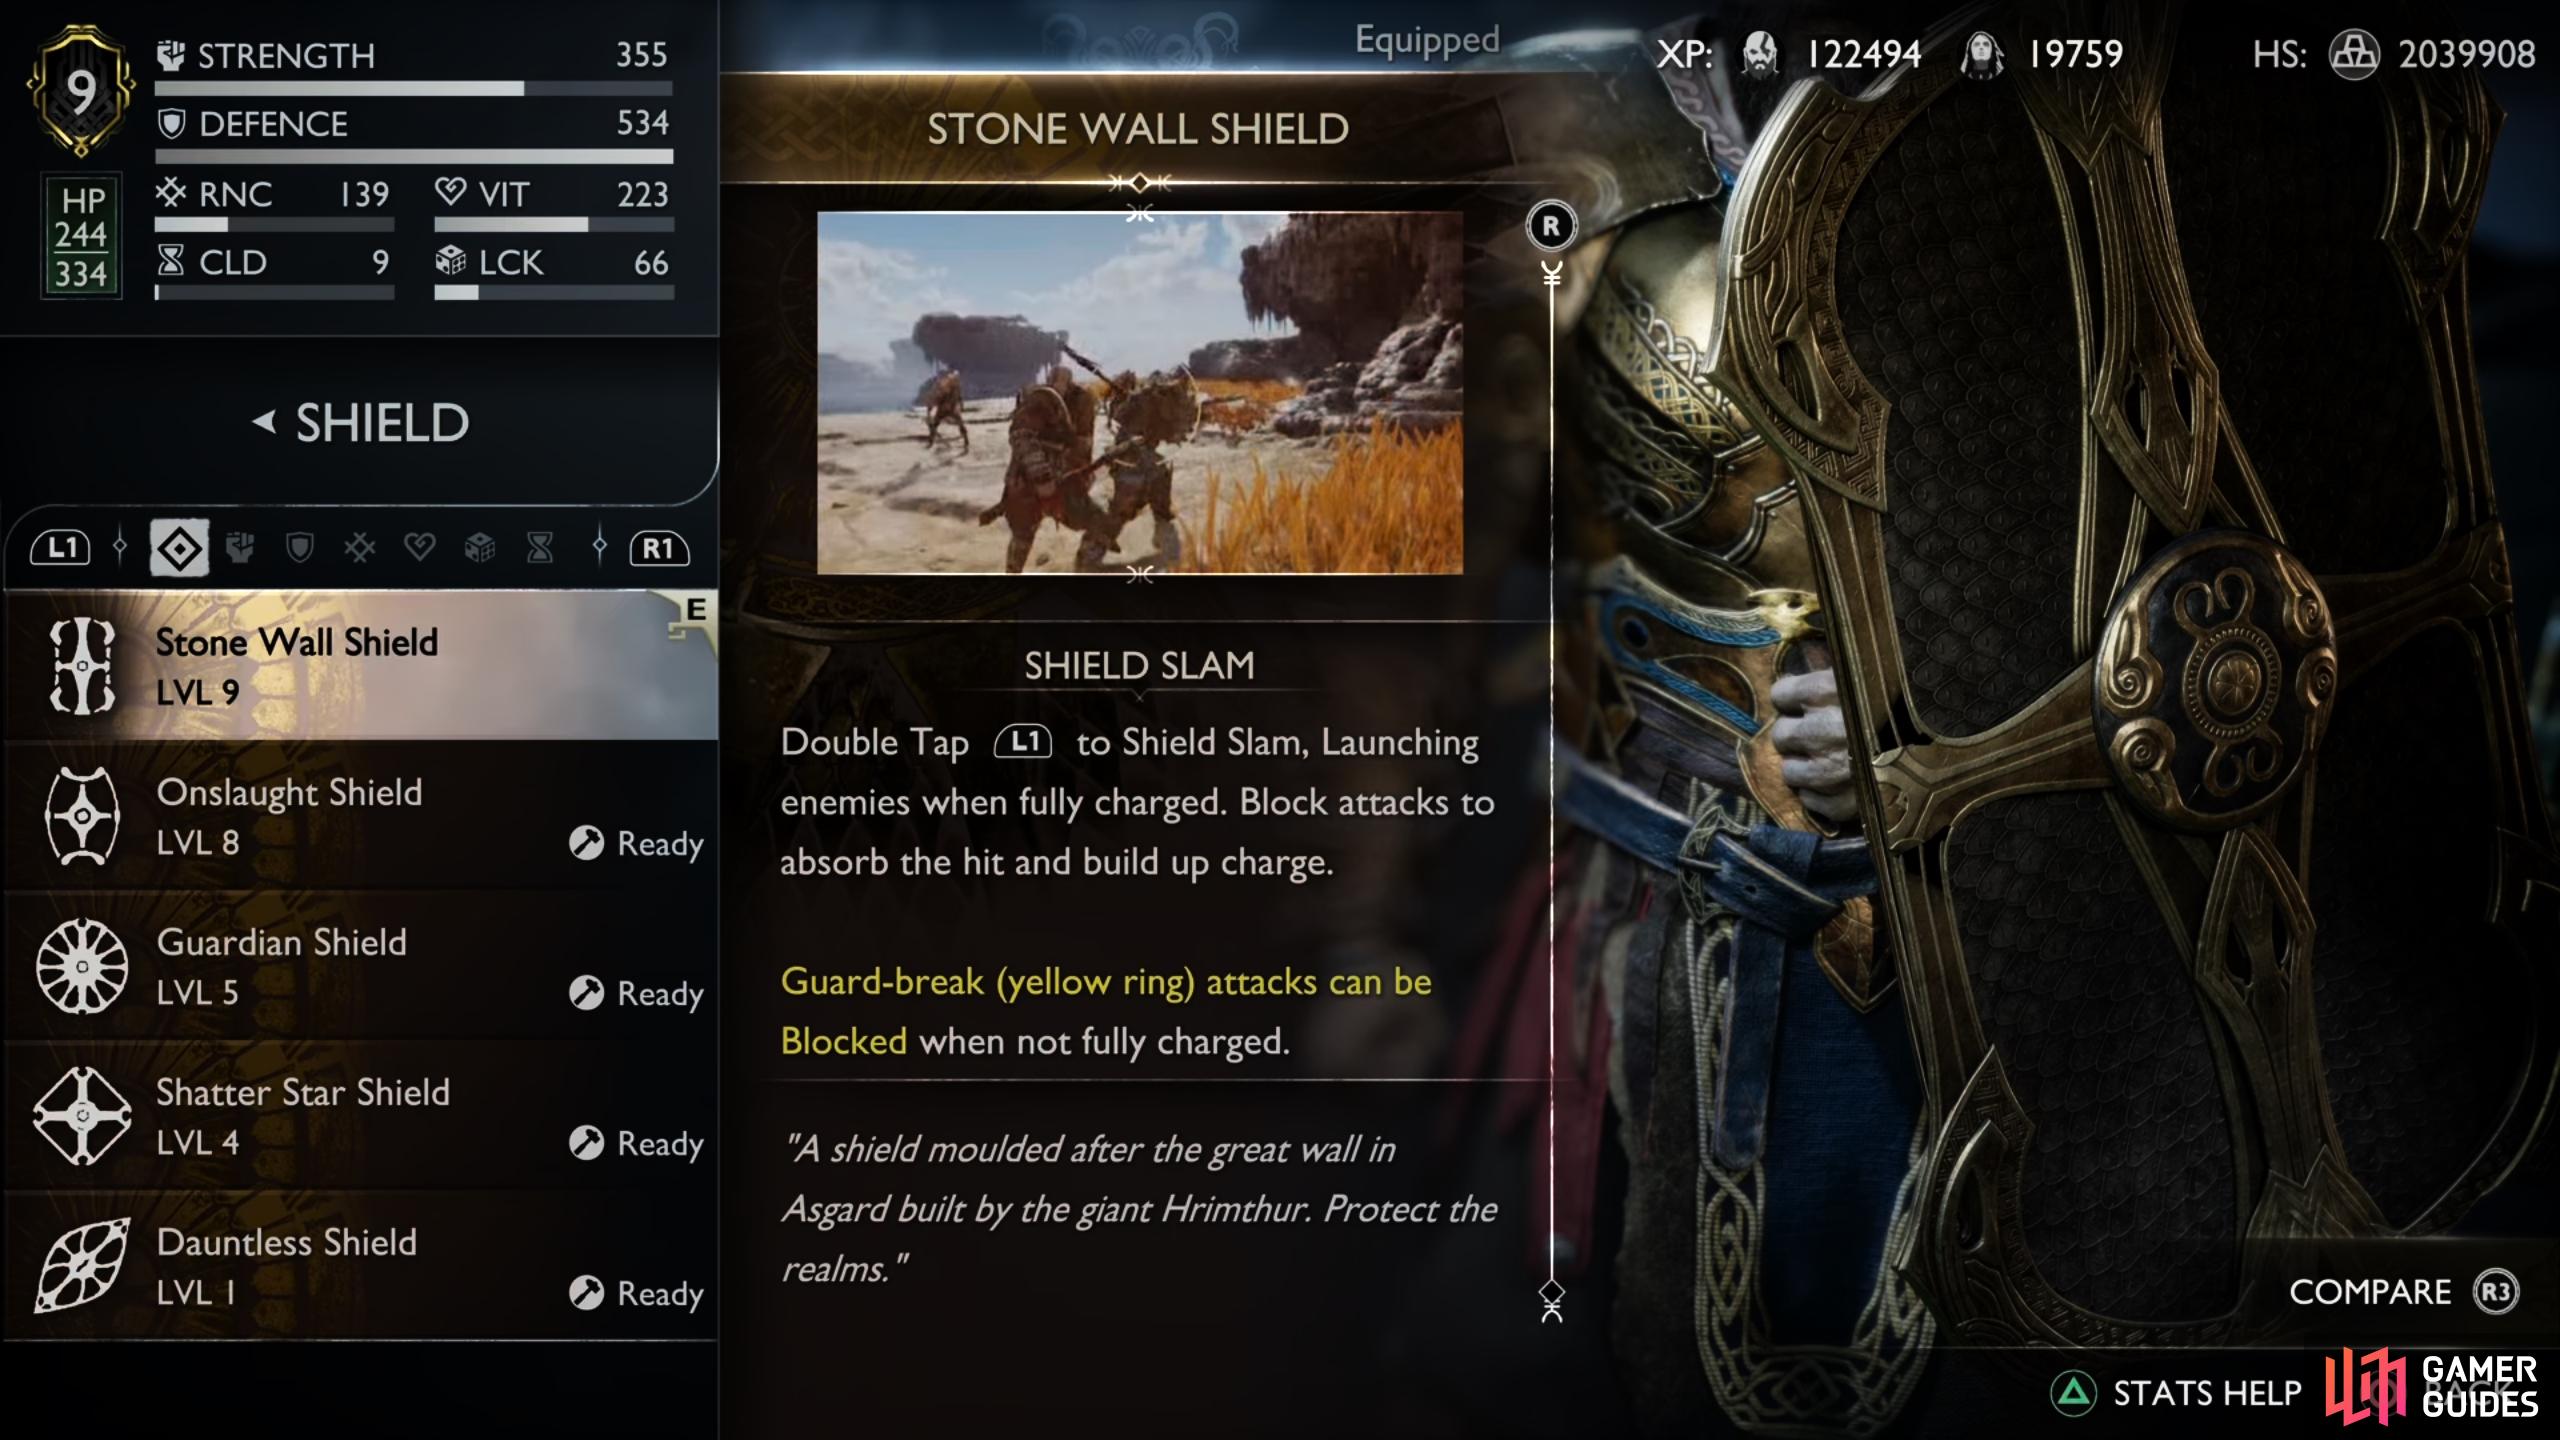 You can purchase the Stone Wall Shield from Brok any time after the first main story mission.